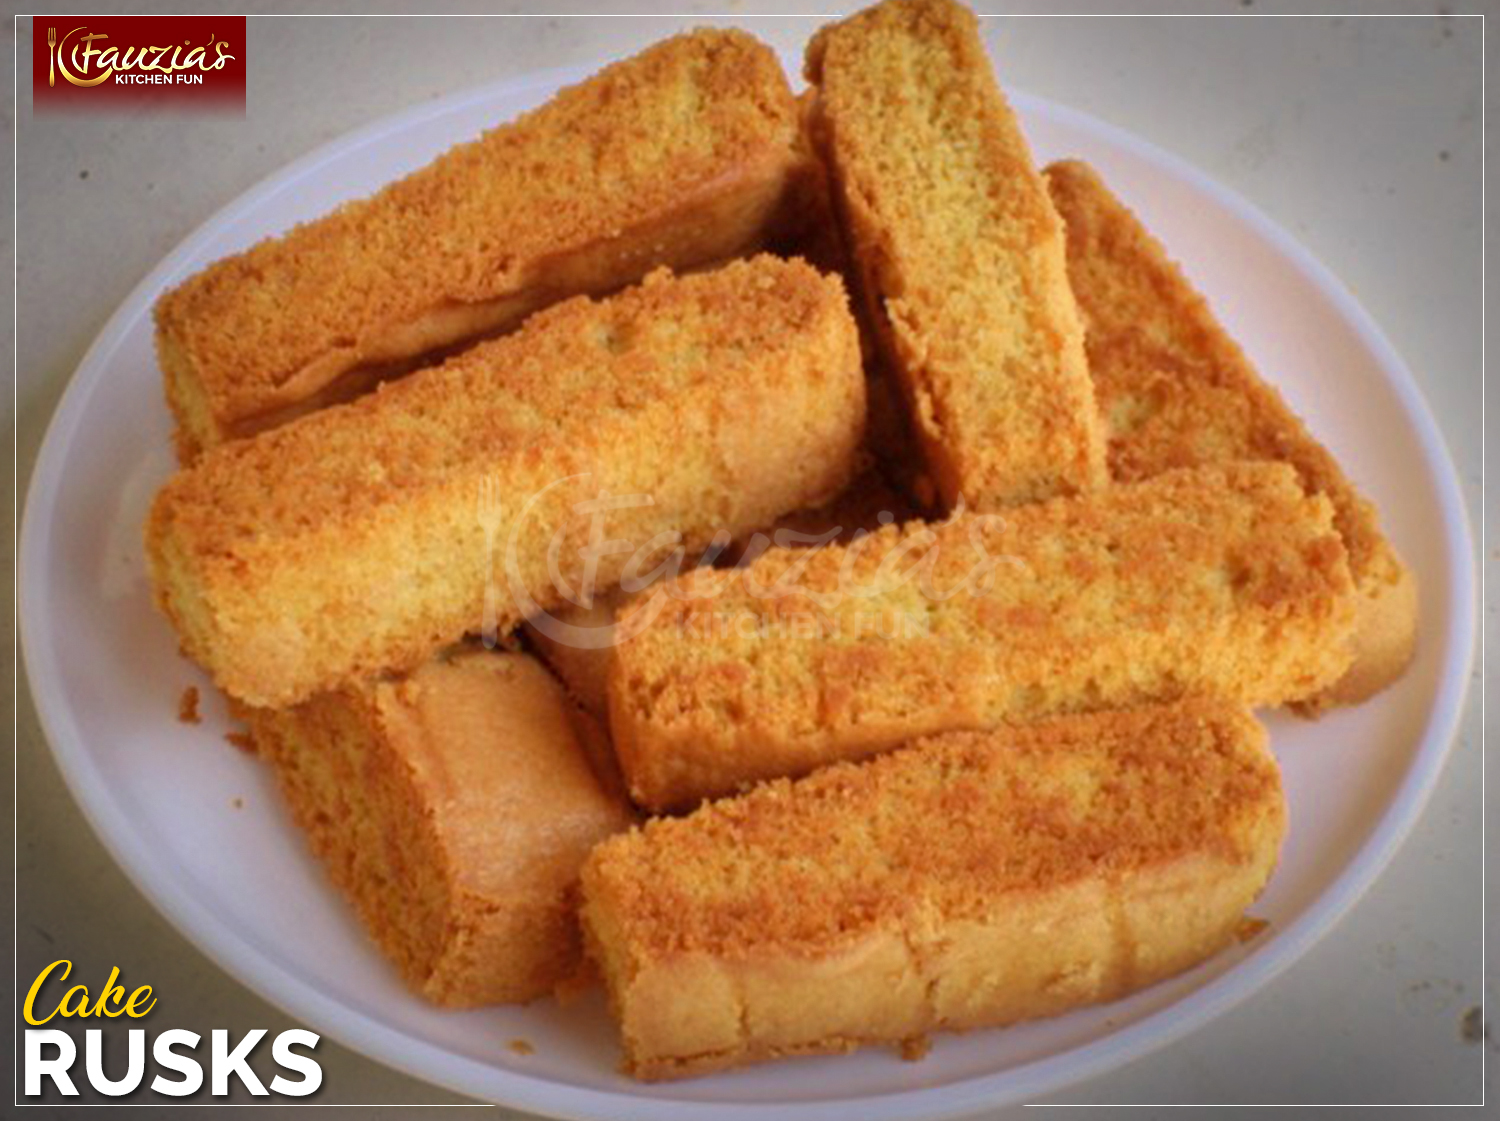 Cake Rusk : Find Recipes, Videos, Articles & Photos related to Cake Rusk